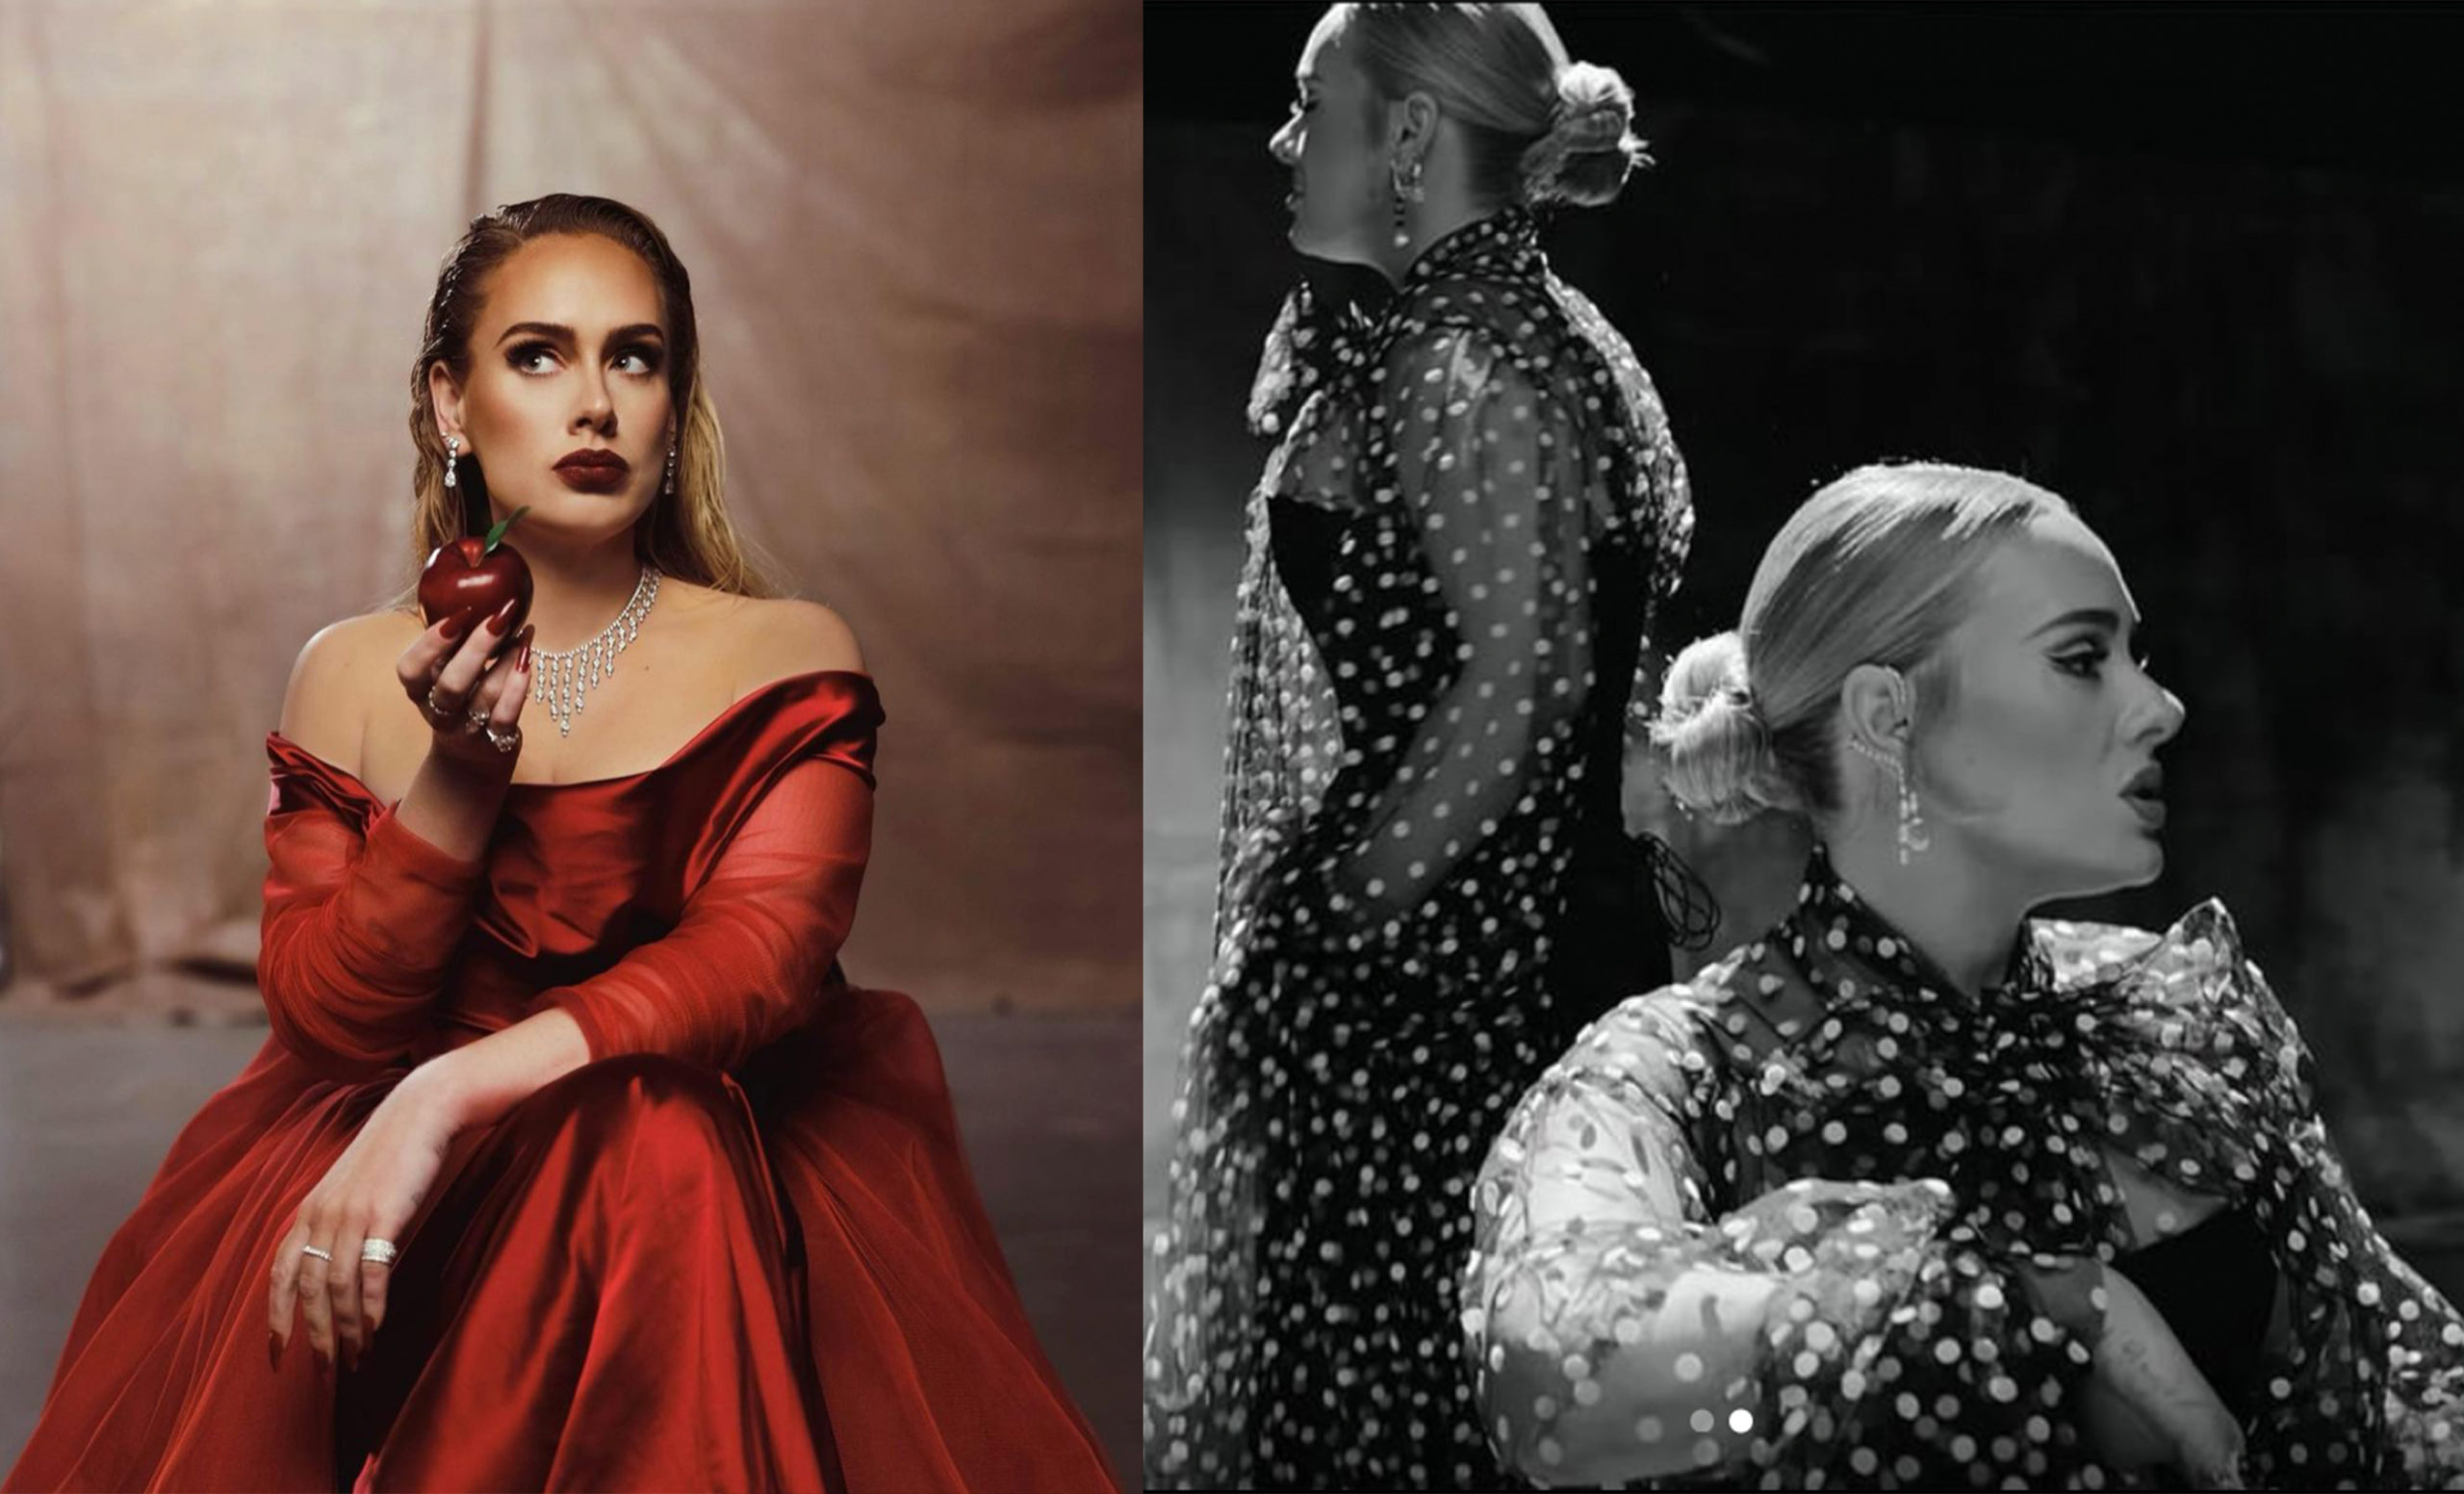 Adele’s ‘Oh My God’ Music Video Is A Moody, Glamorous Mess And We Can’t Help But Love It